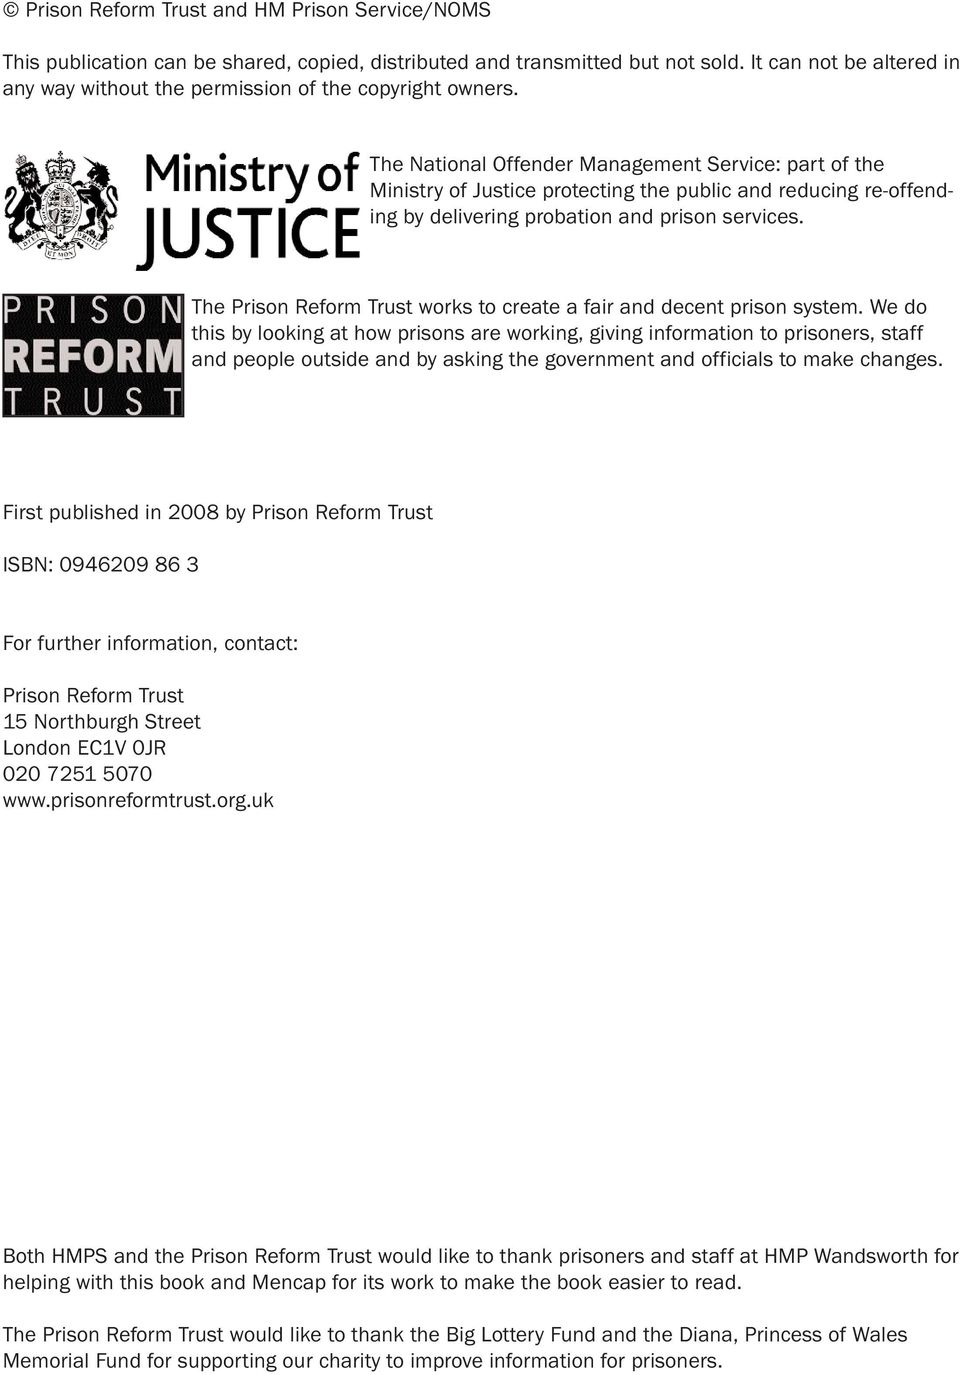 The National Offender Management Service: part of the Ministry of Justice protecting the public and reducing re-offending by delivering probation and prison services.